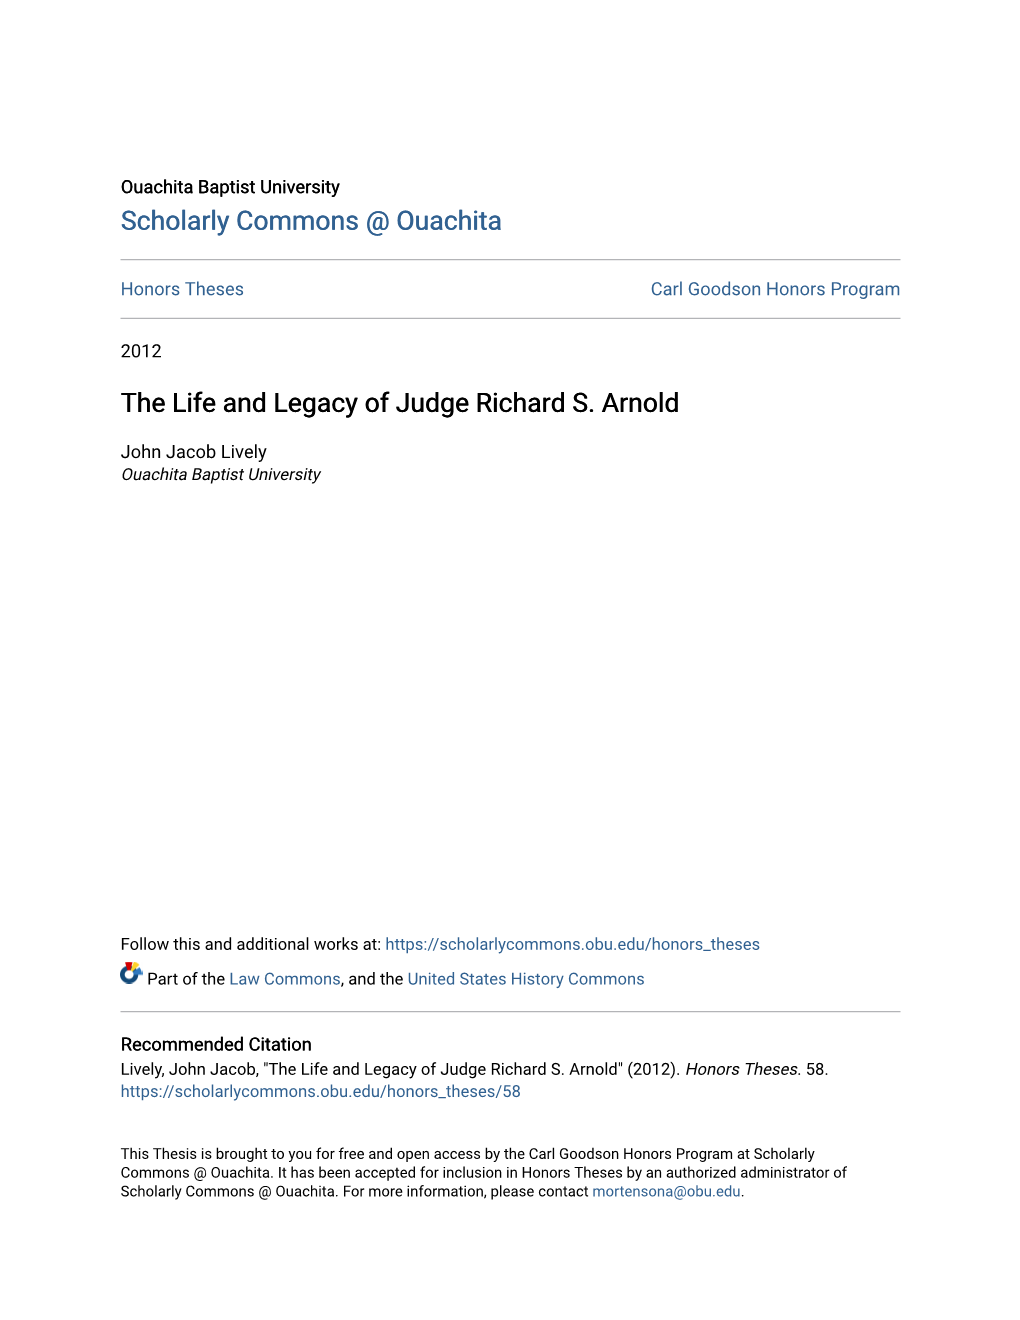 The Life and Legacy of Judge Richard S. Arnold